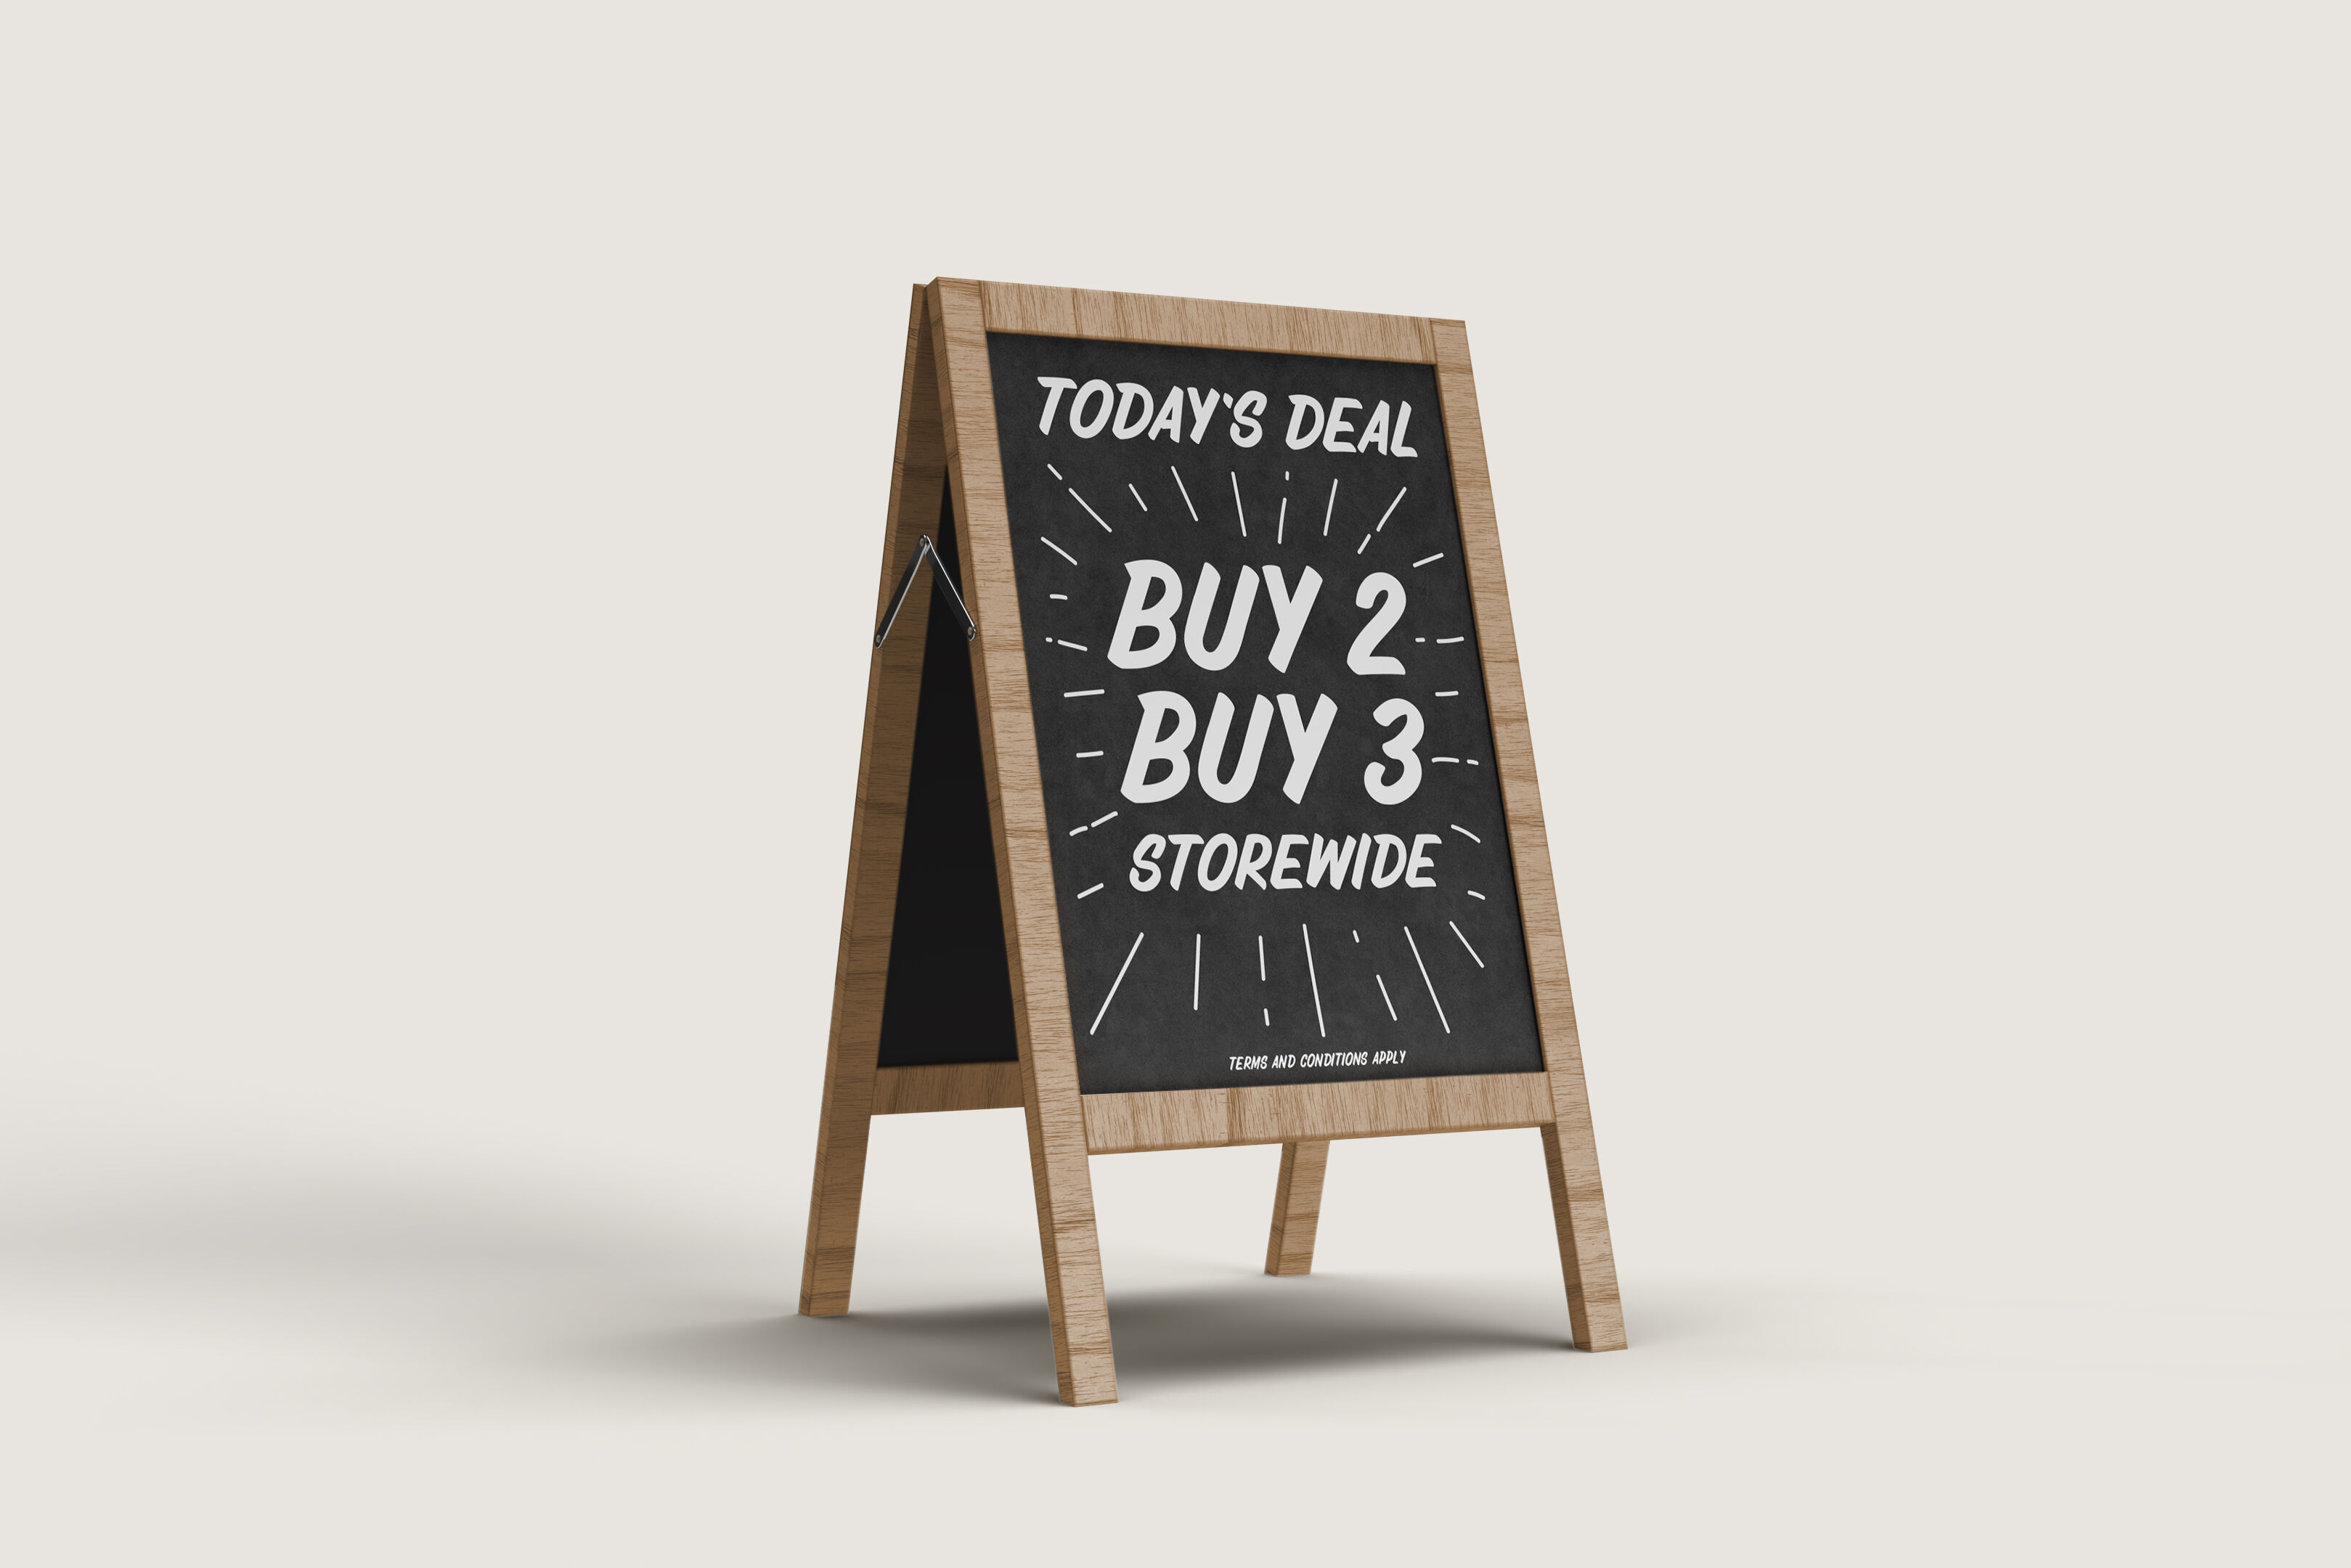 A wooden A-frame signboard displaying a storewide promotion of "Buy 2, Get 1 Free".